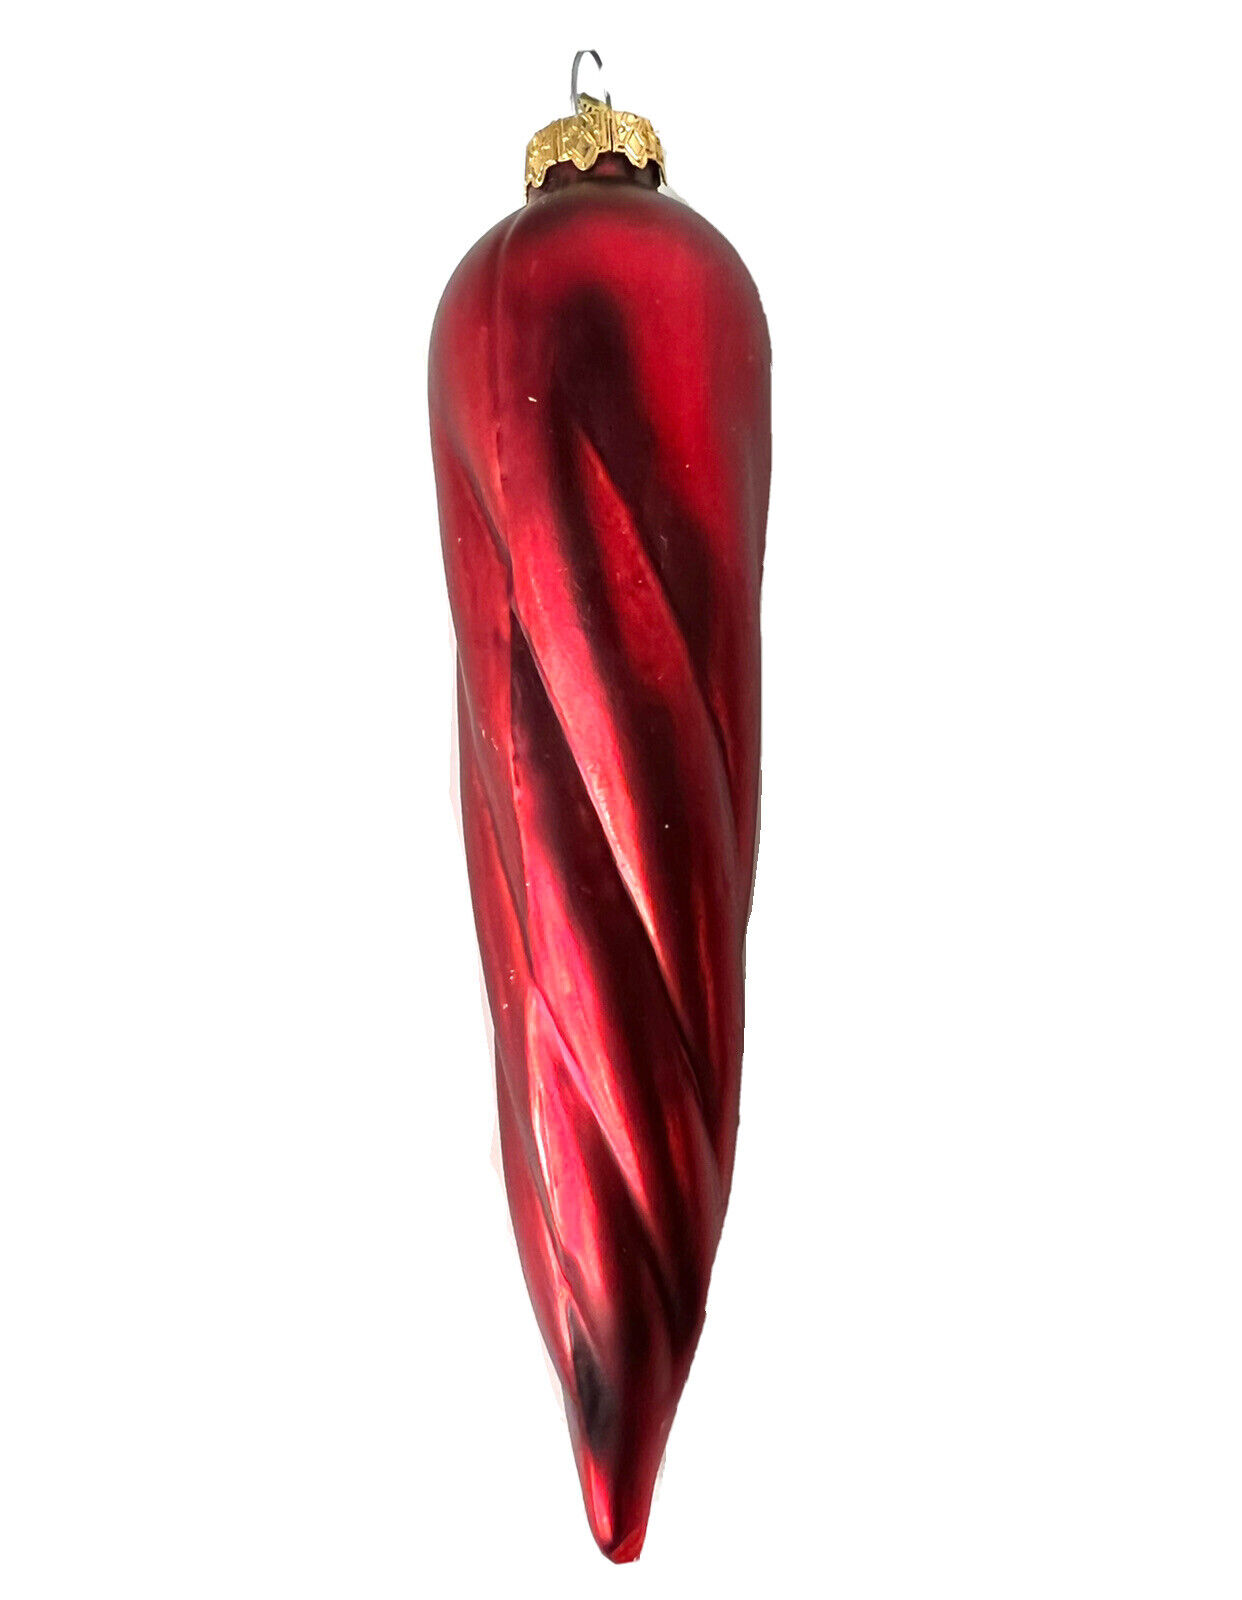 Red Chili Pepper Unbreakable Ornament Matte Finish ￼6.5” Long